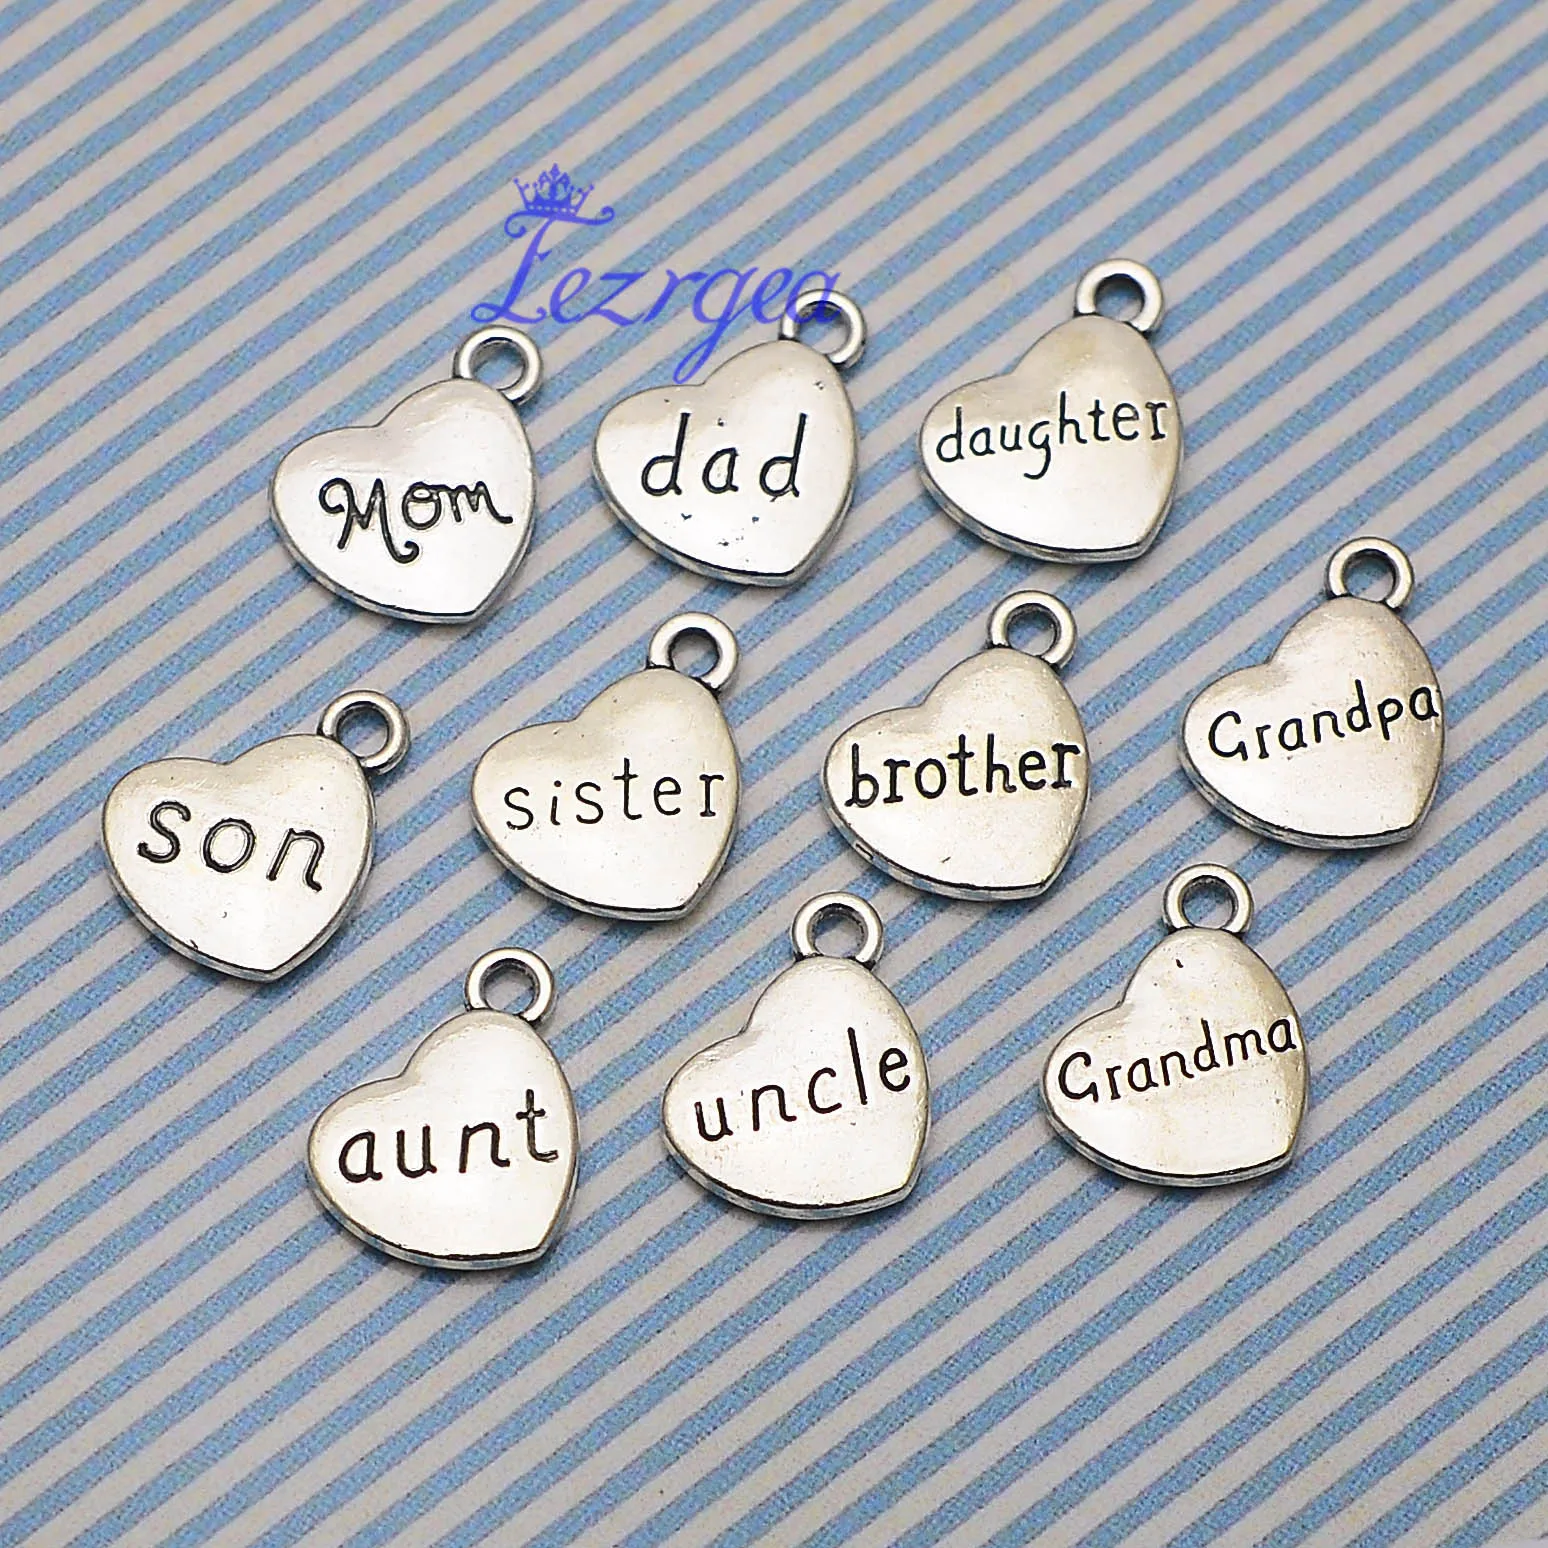 

15pcs/lot--15x18mm Antique Silver Plated Heart Grandpa Grandma Daughter Son Mom Dad Brother Sister Letter Charms DIY Supplies